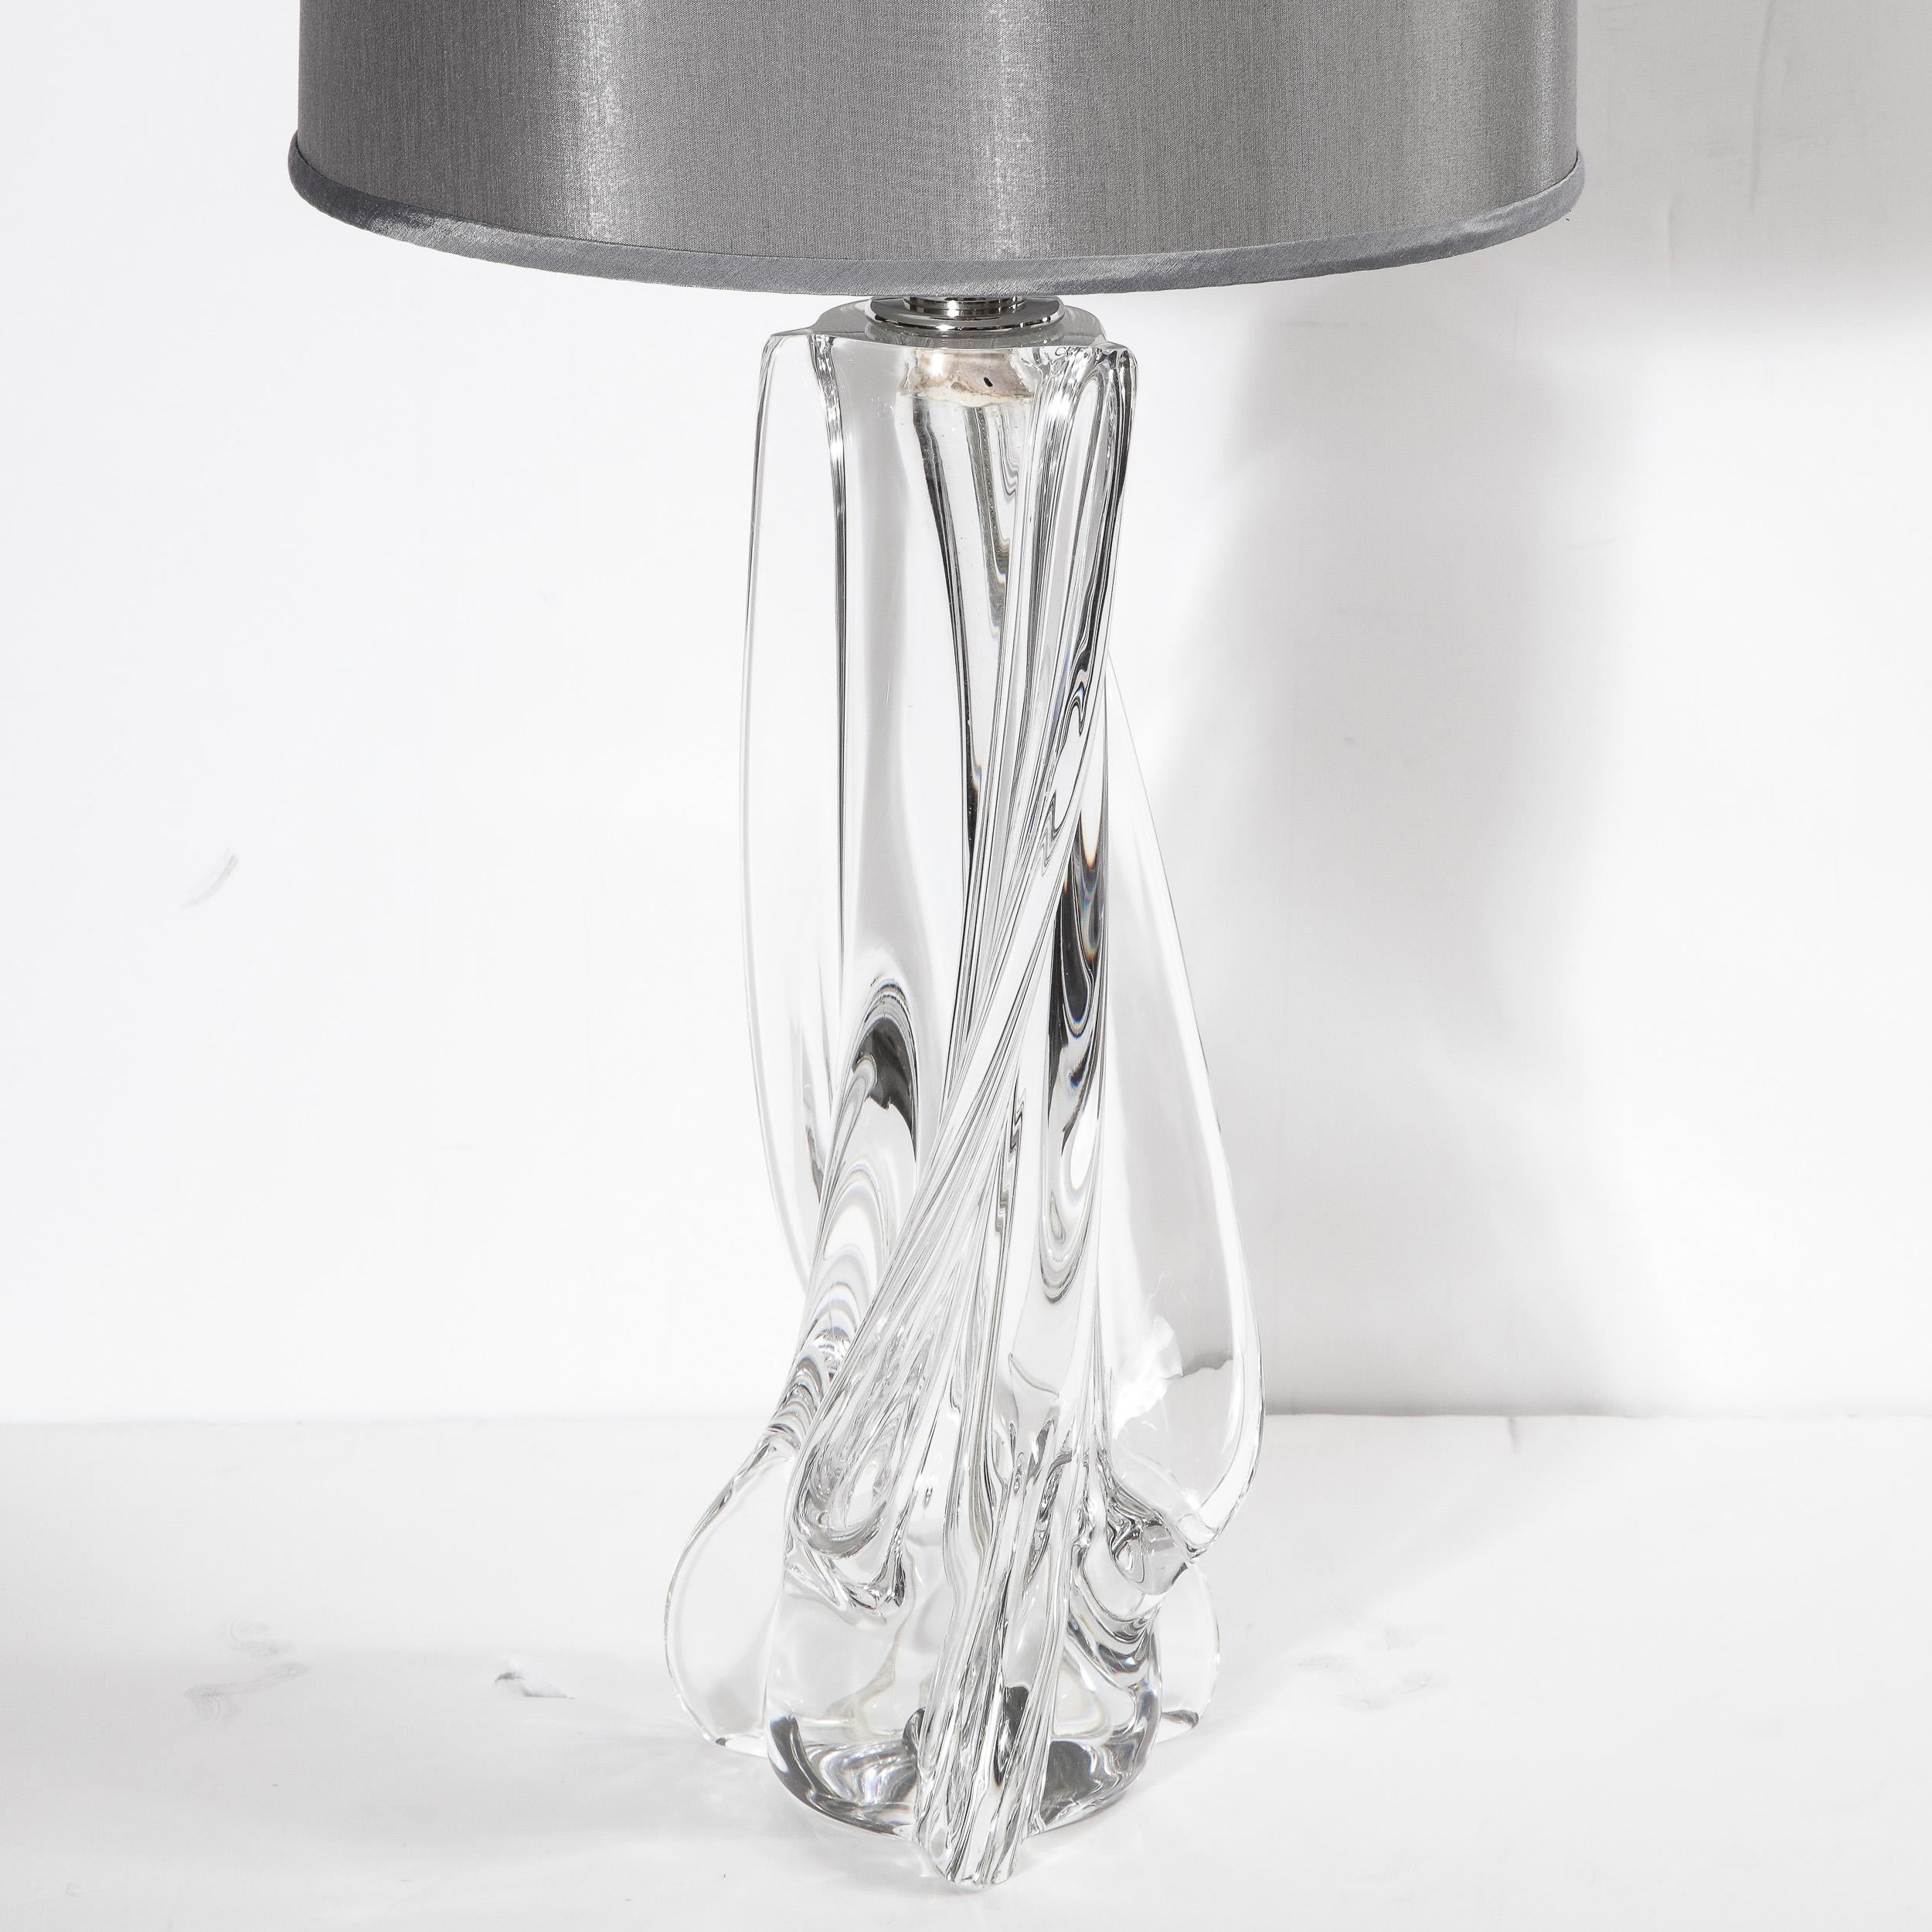 Hollywood Regency Sculptural Translucent Crystal Table Lamp Signed by Sevres In Excellent Condition For Sale In New York, NY